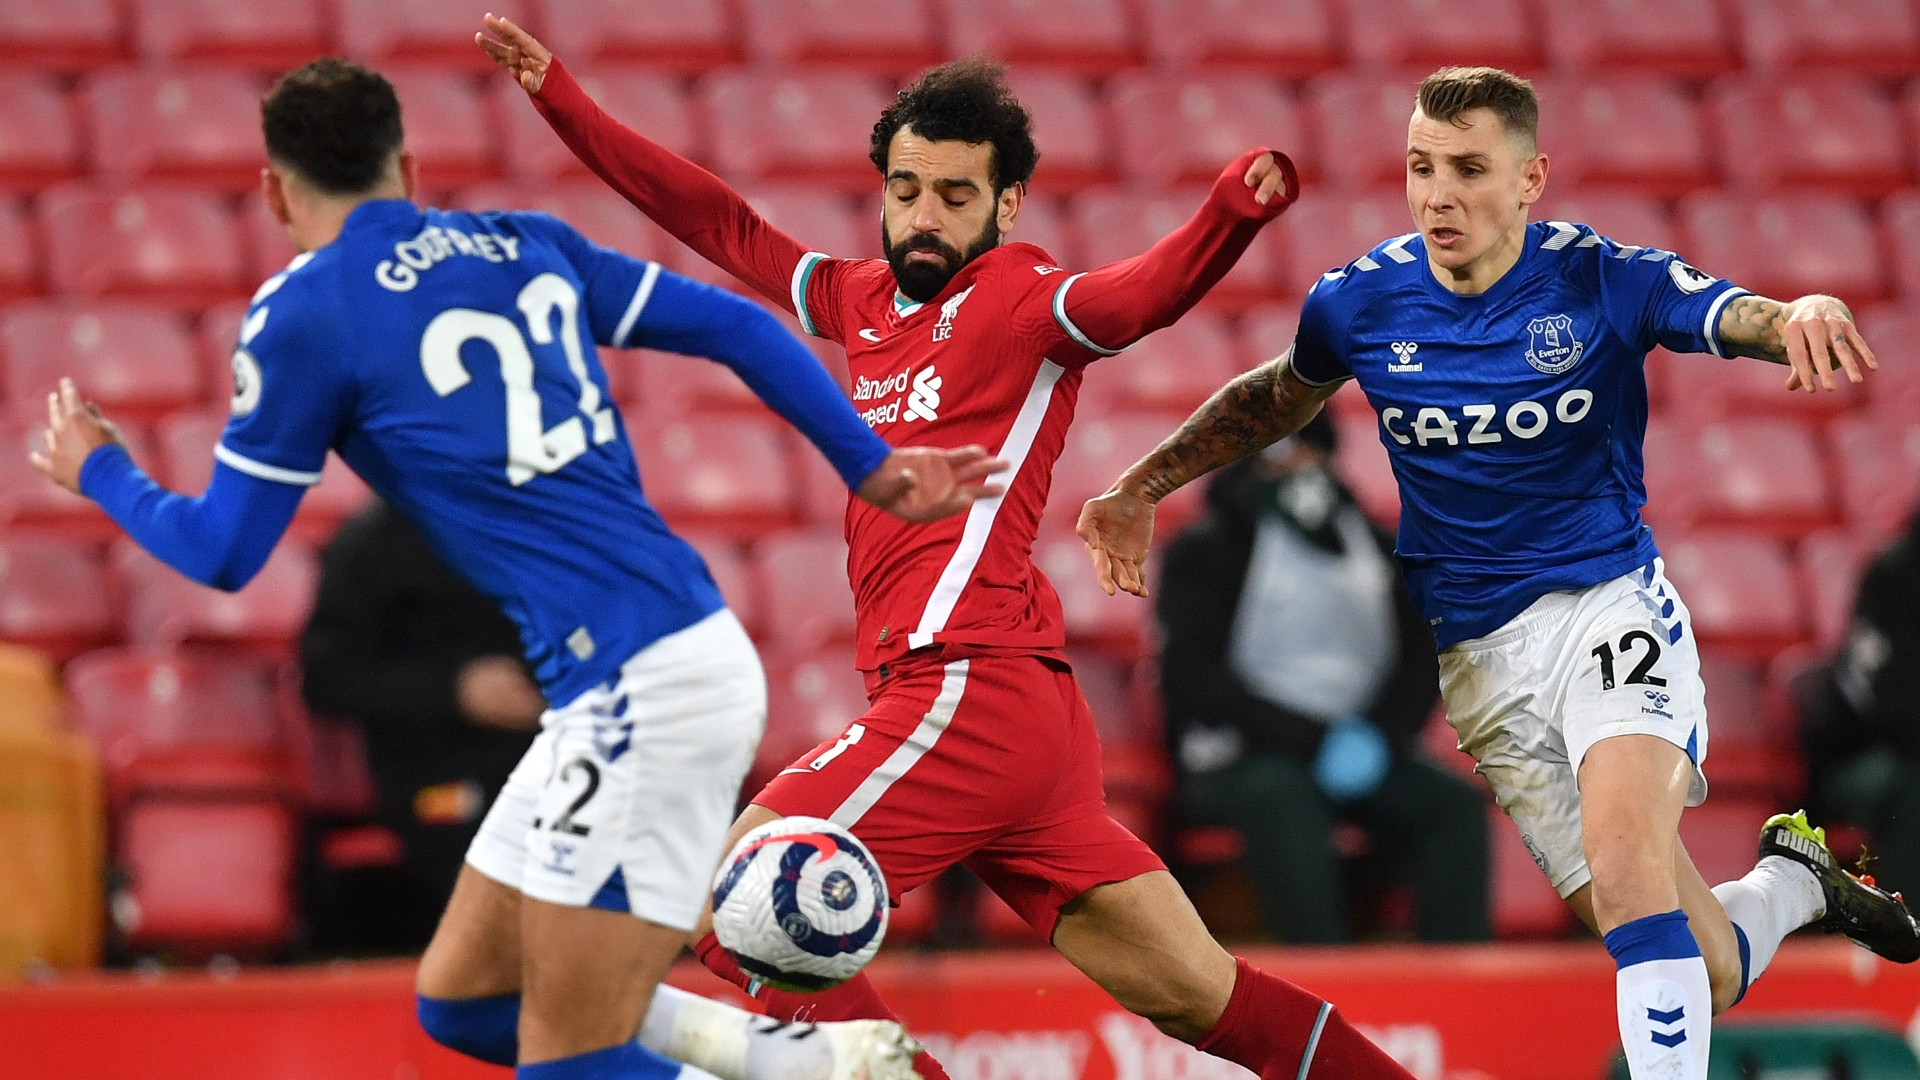 Everton vs Liverpool BetKing Tips: Latest odds, team news, preview and predictions | Goal.com